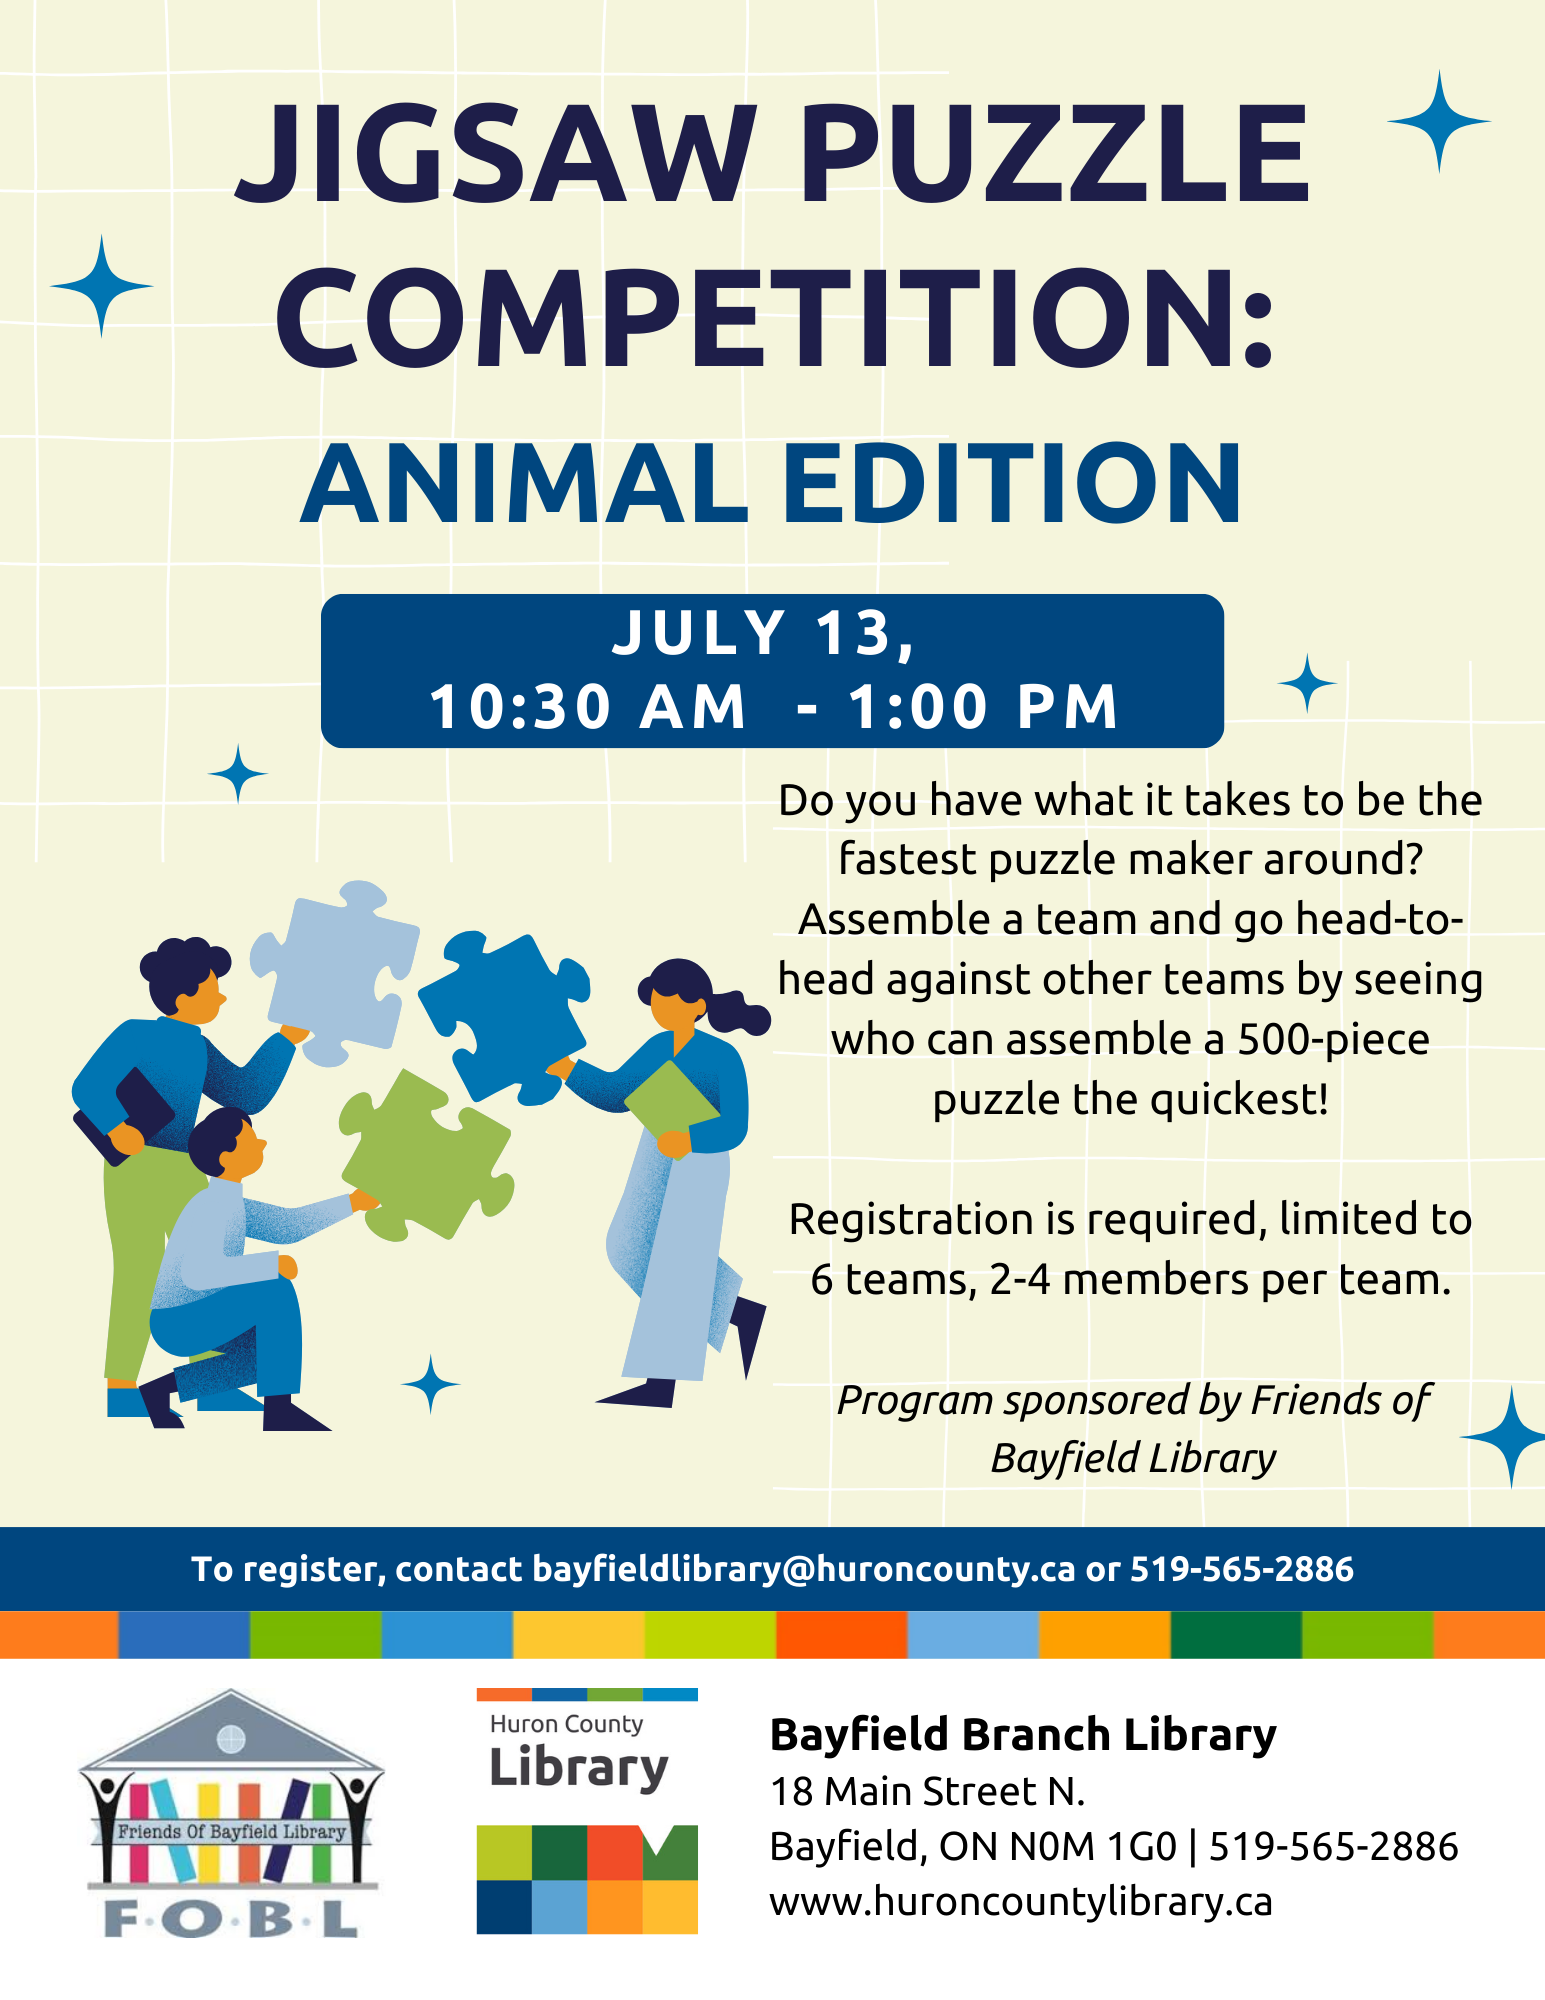 Team up with a friend or two and register for the Jigsaw Puzzle Competition